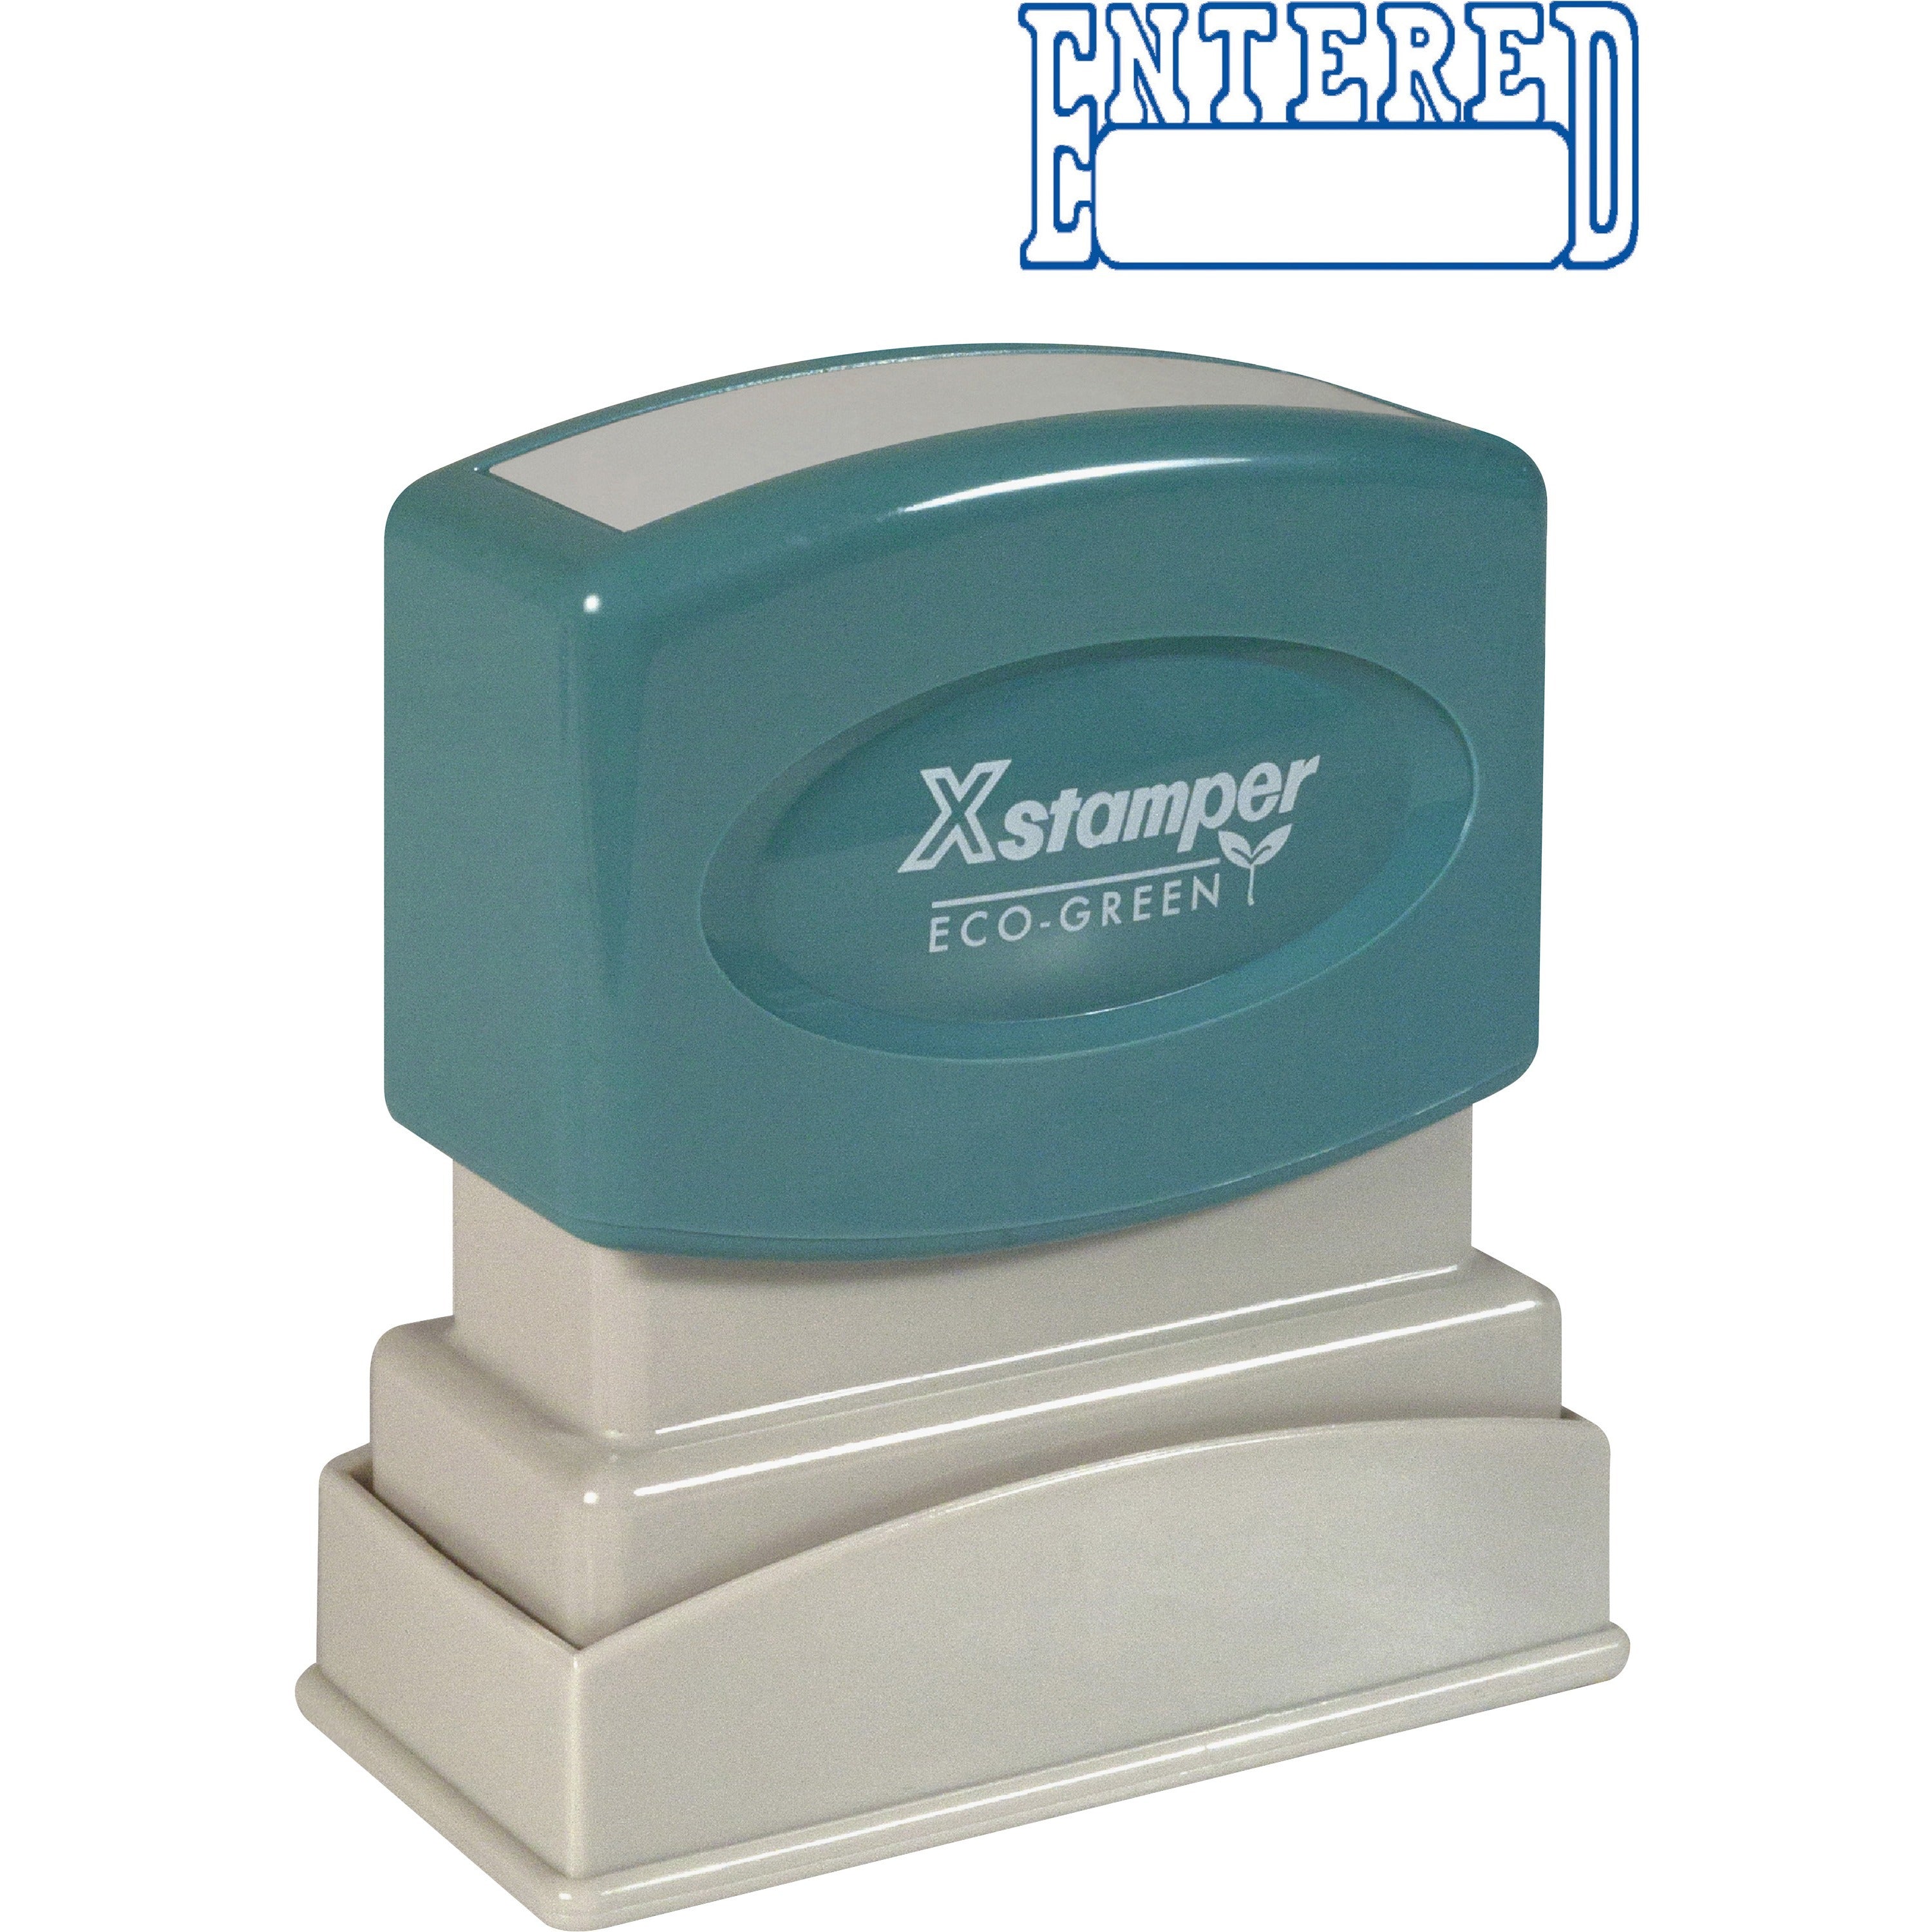 Xstamper ENTERED Open Space Title Stamp - Message Stamp - "ENTERED" - 0.50" Impression Width x 1.62" Impression Length - 100000 Impression(s) - Blue - Recycled - 1 Each - 